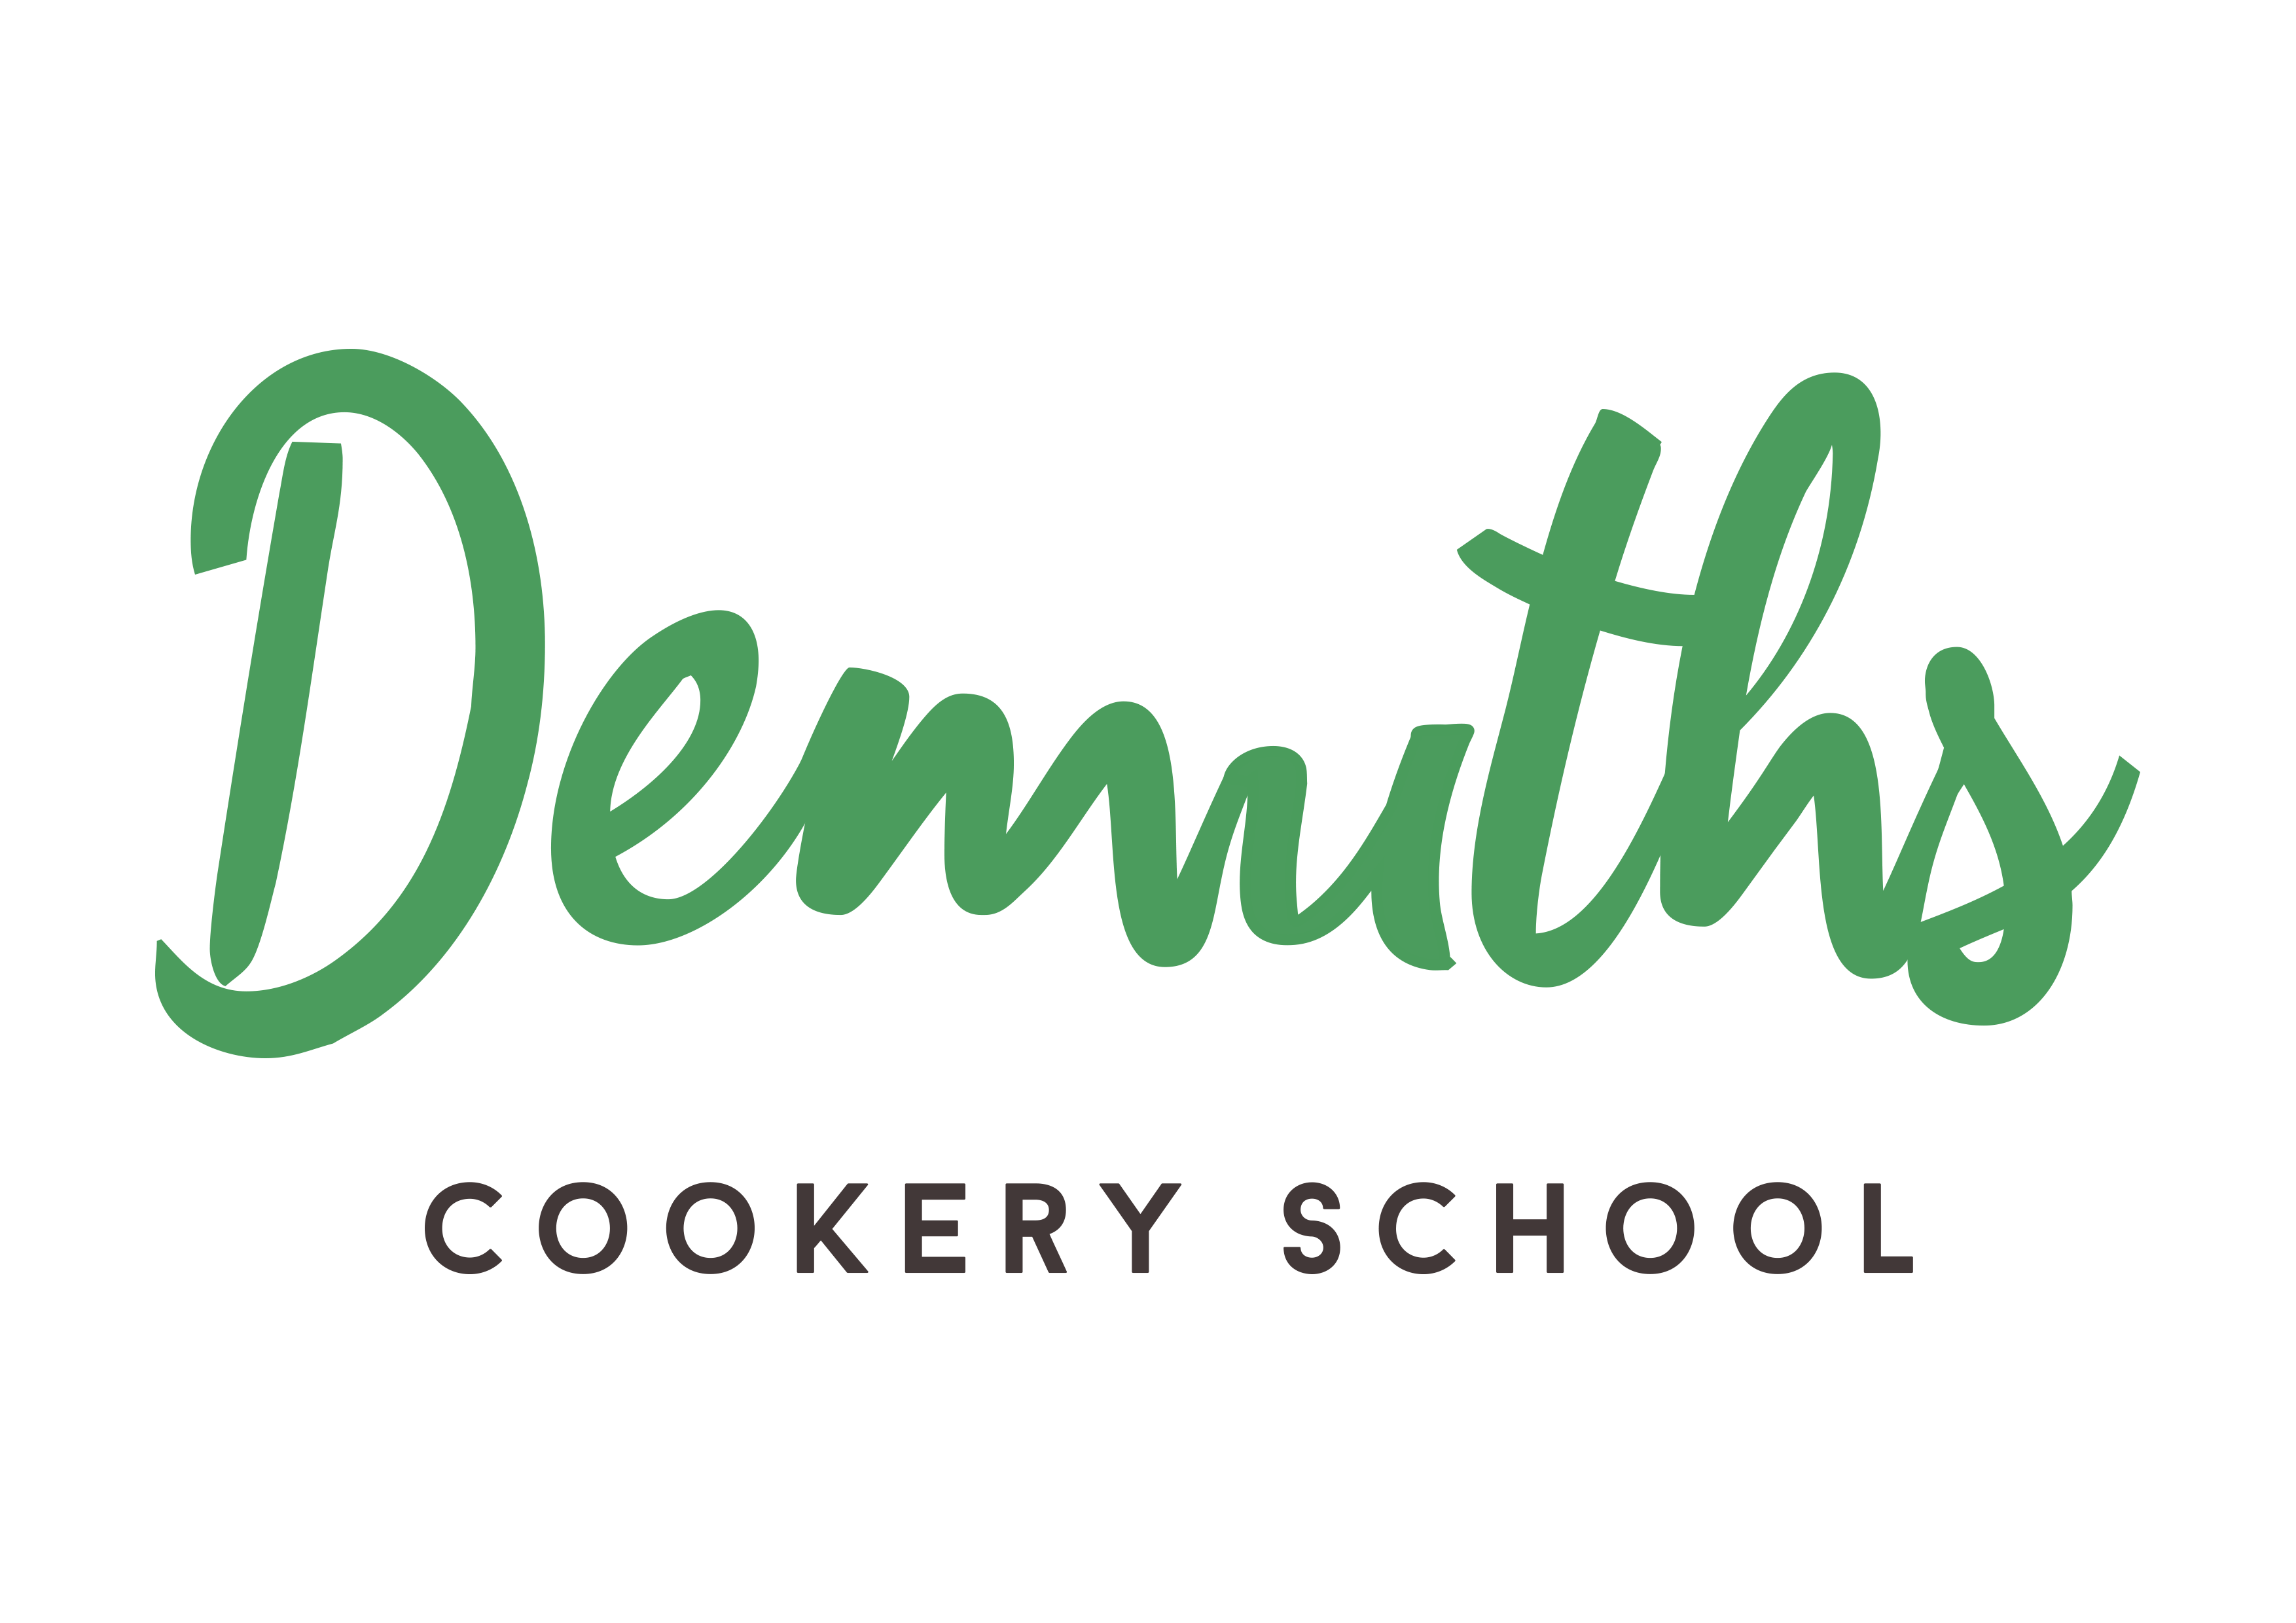 Guest Post - My review of the Demuths Vegan Diploma